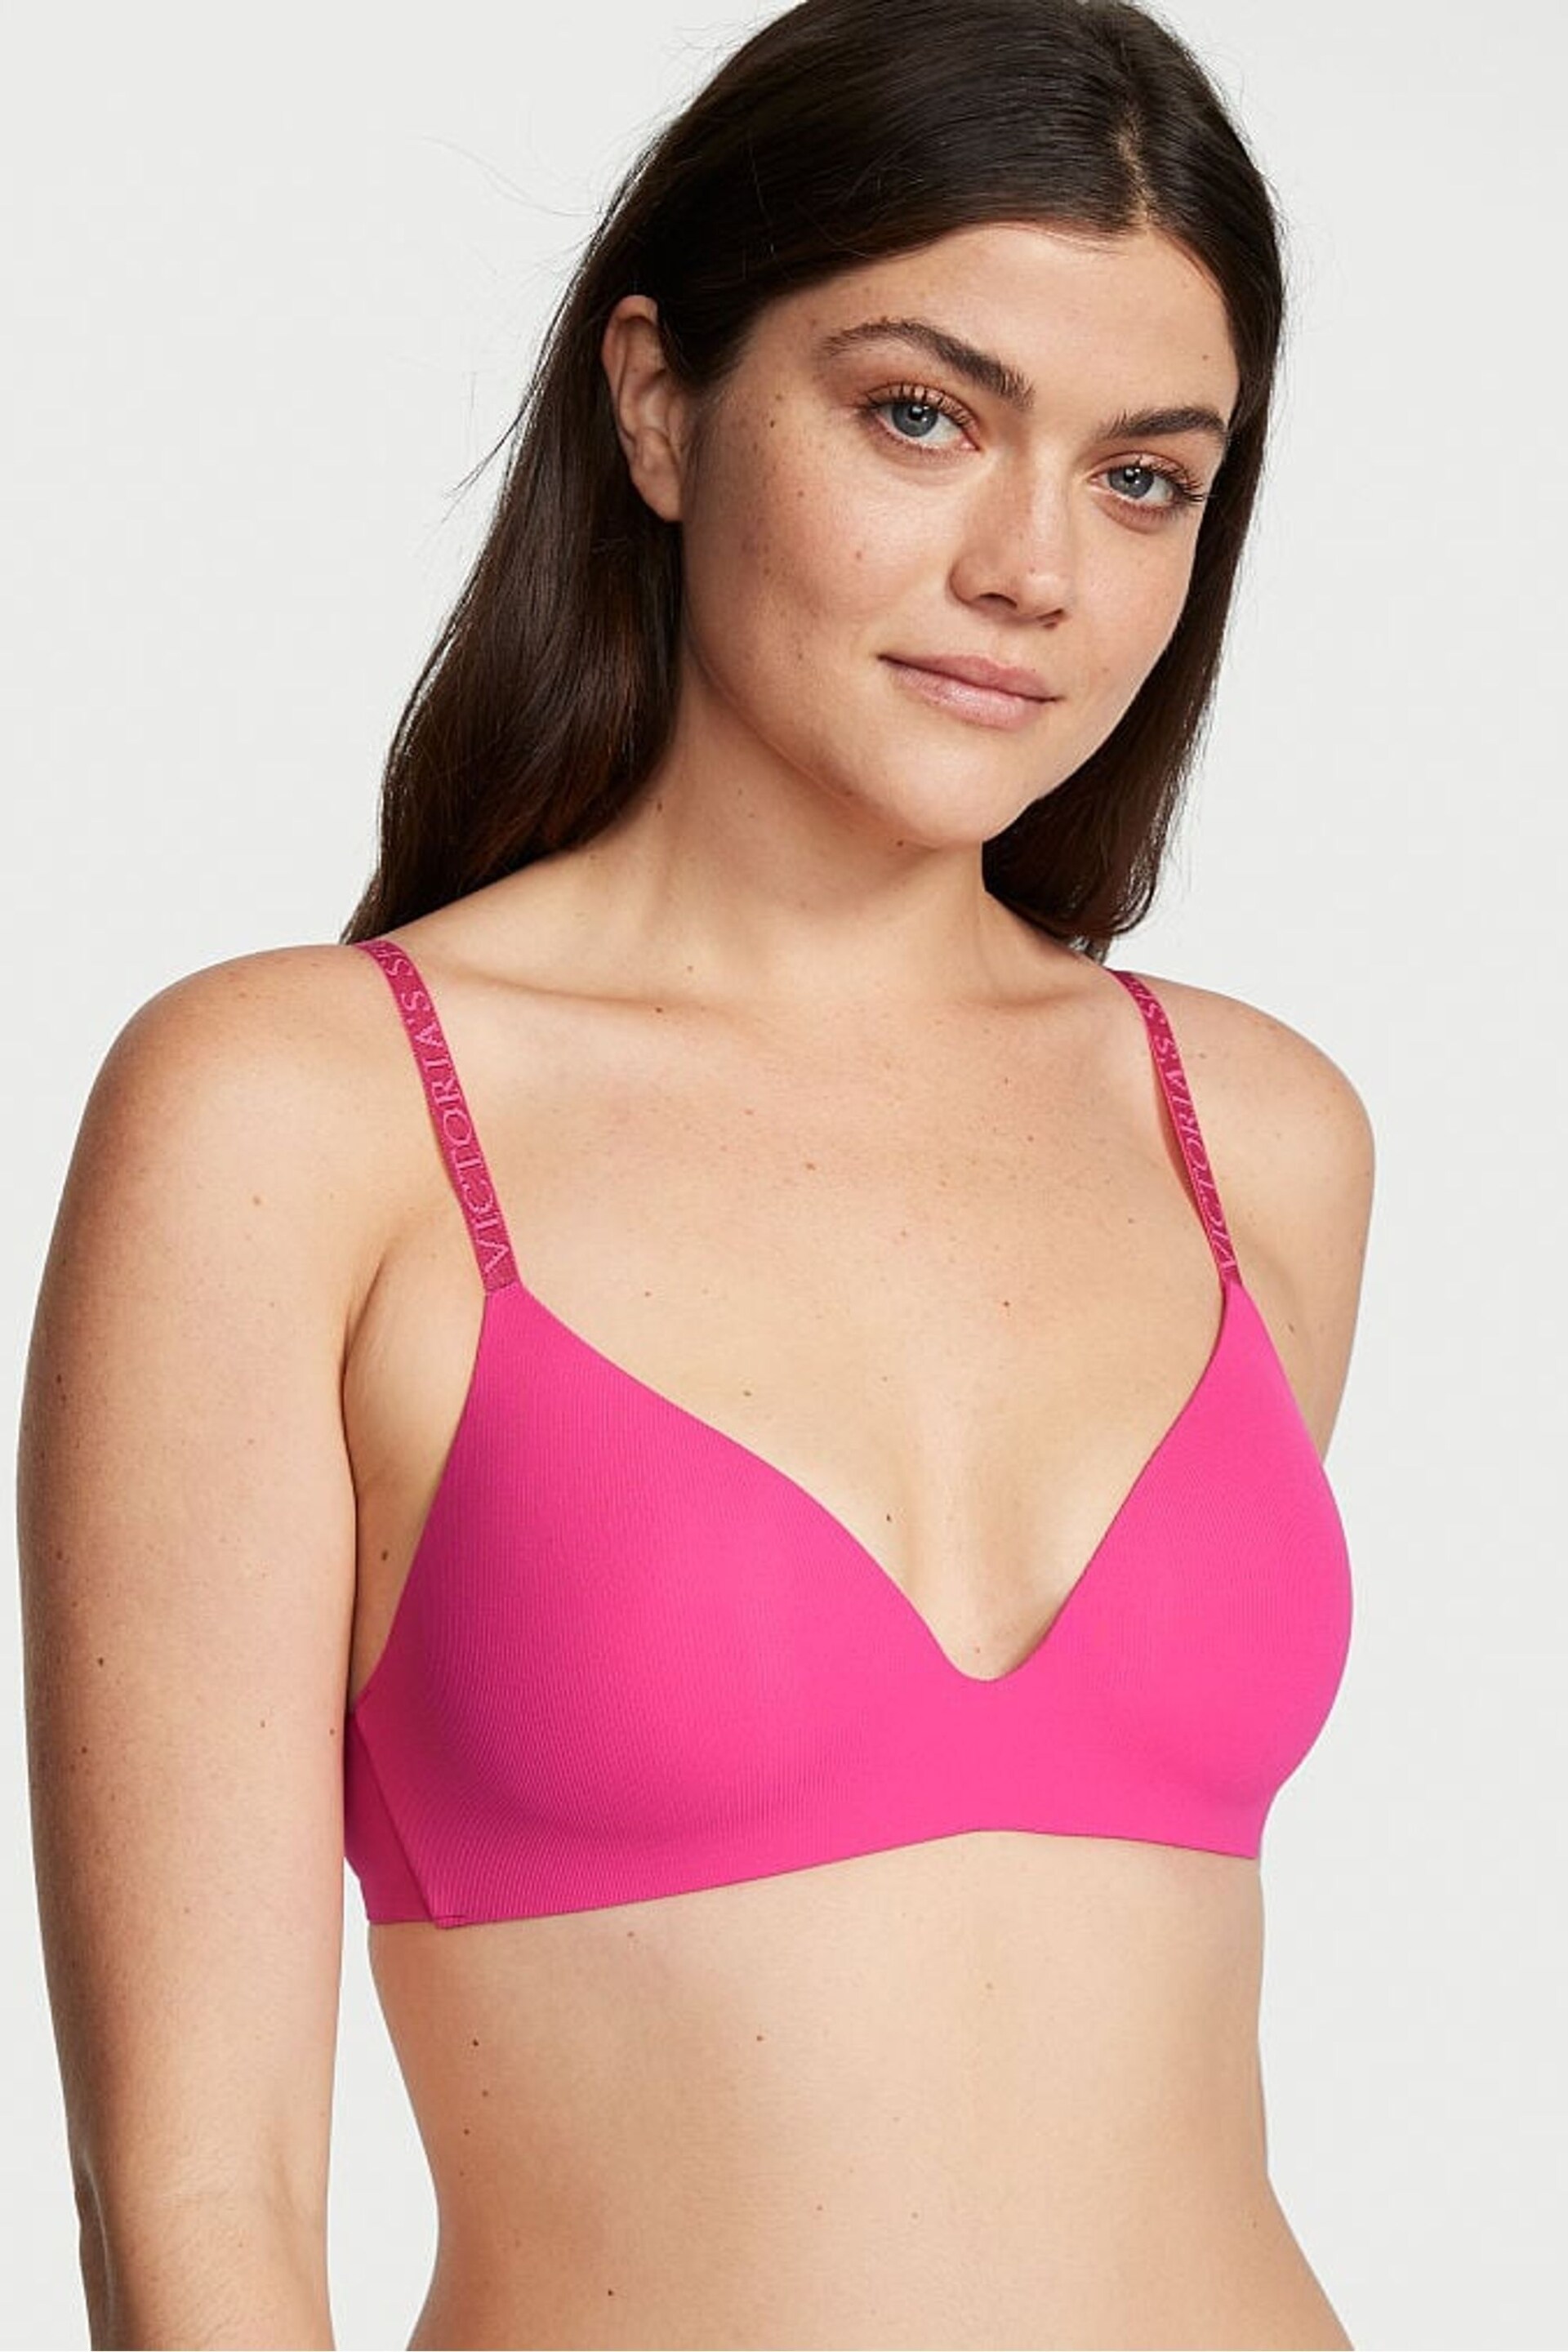 Victoria's Secret Pink Fever Smooth Lightly Lined Non Wired T-Shirt Bra - Image 1 of 3